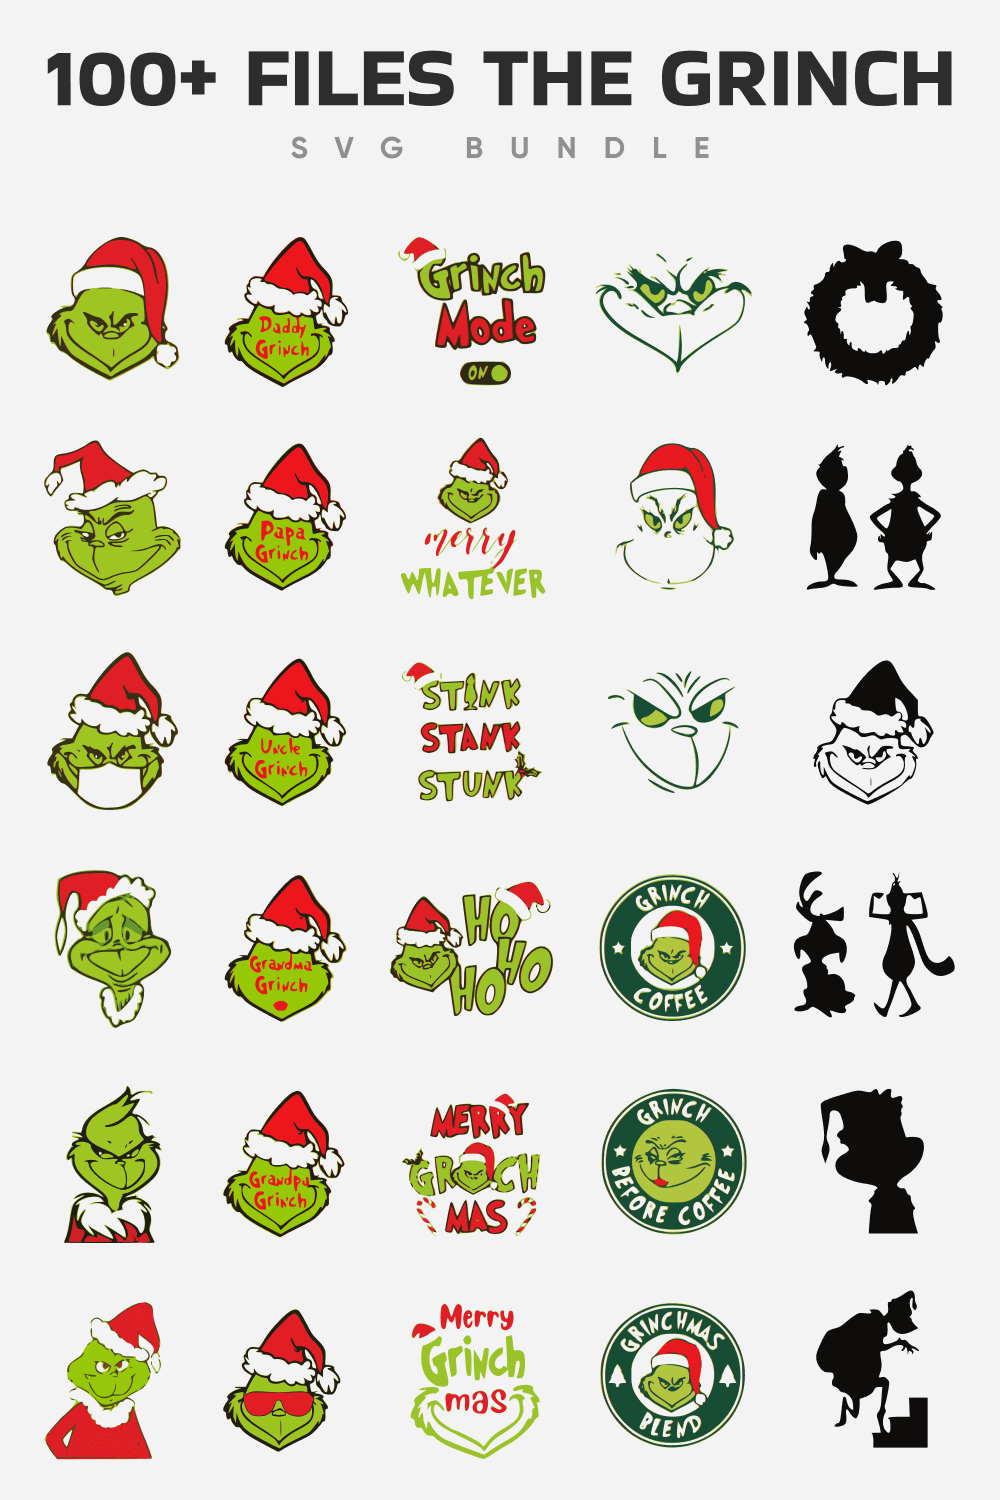 Sly Grinch in different guises.